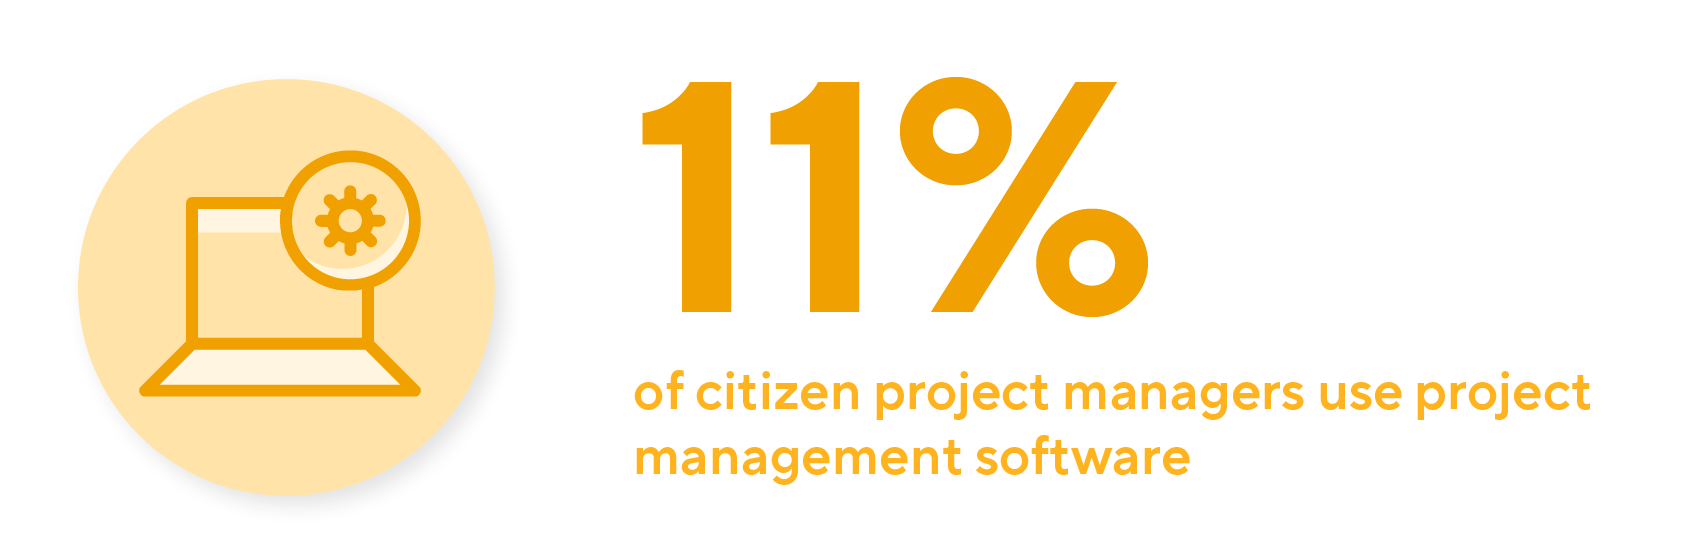 Infographic - only 11% of citizen project managers have access to project management software